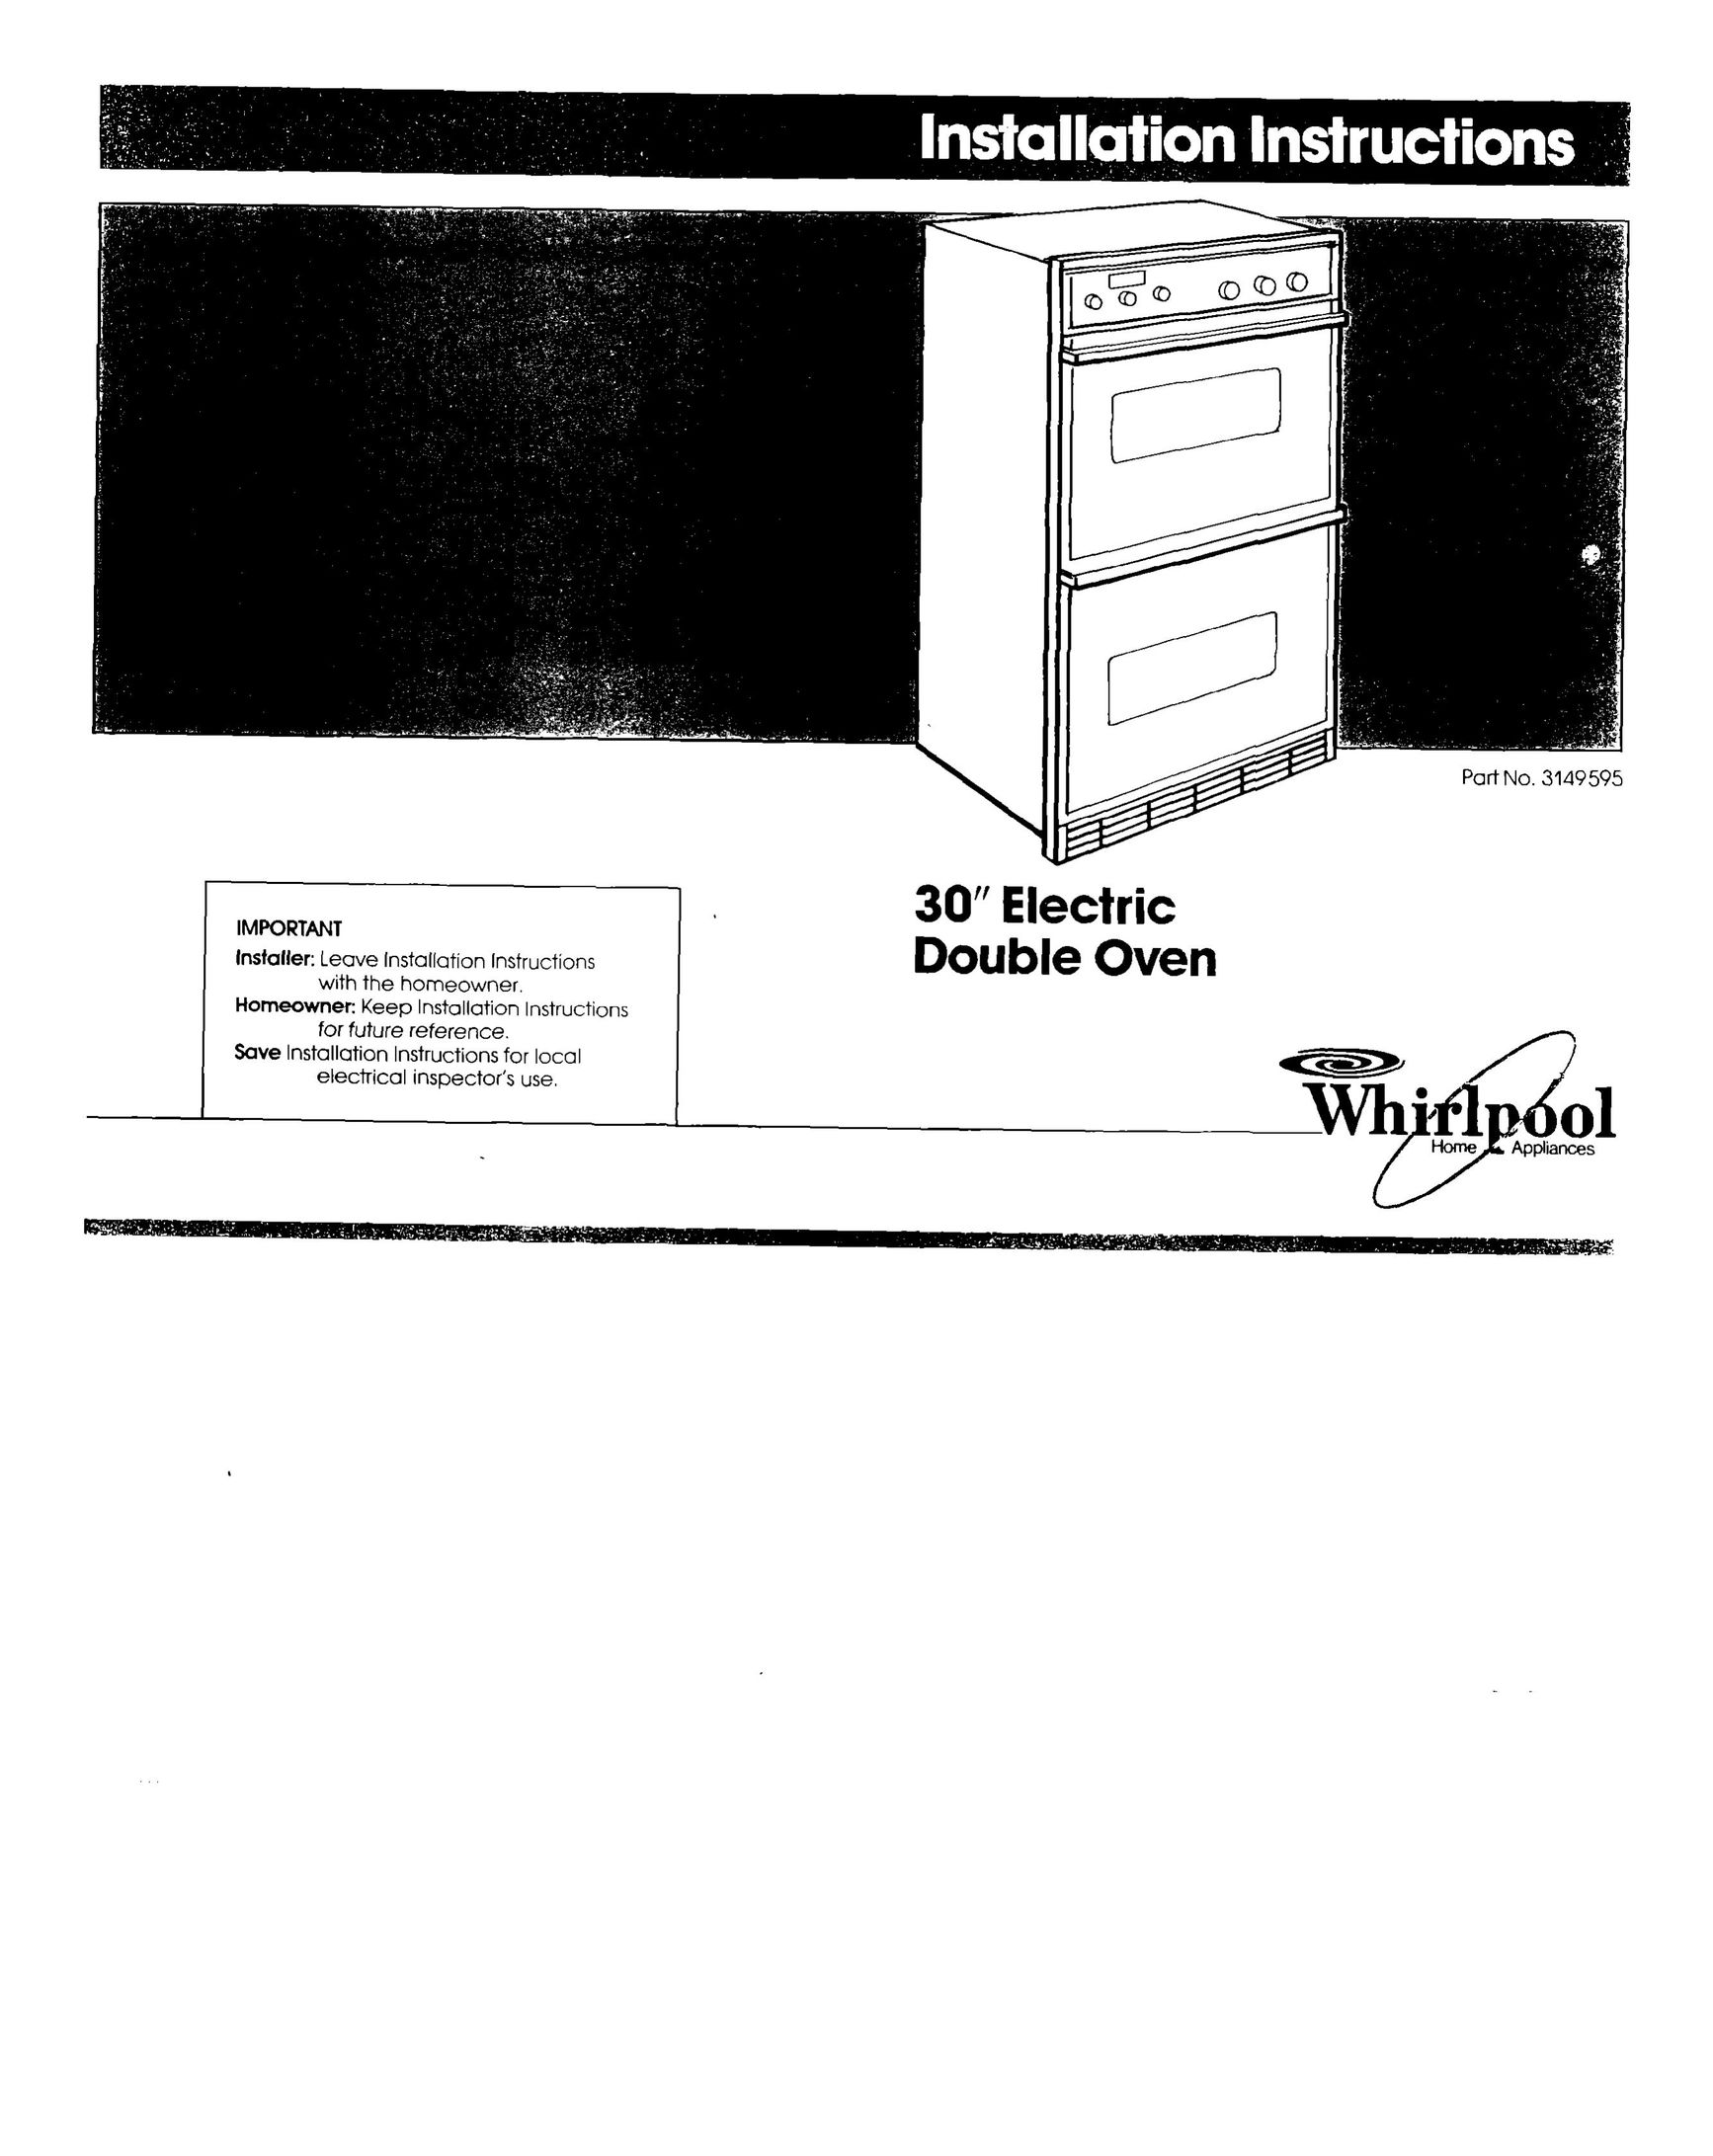 Whirlpool 3149595 Double Oven User Manual